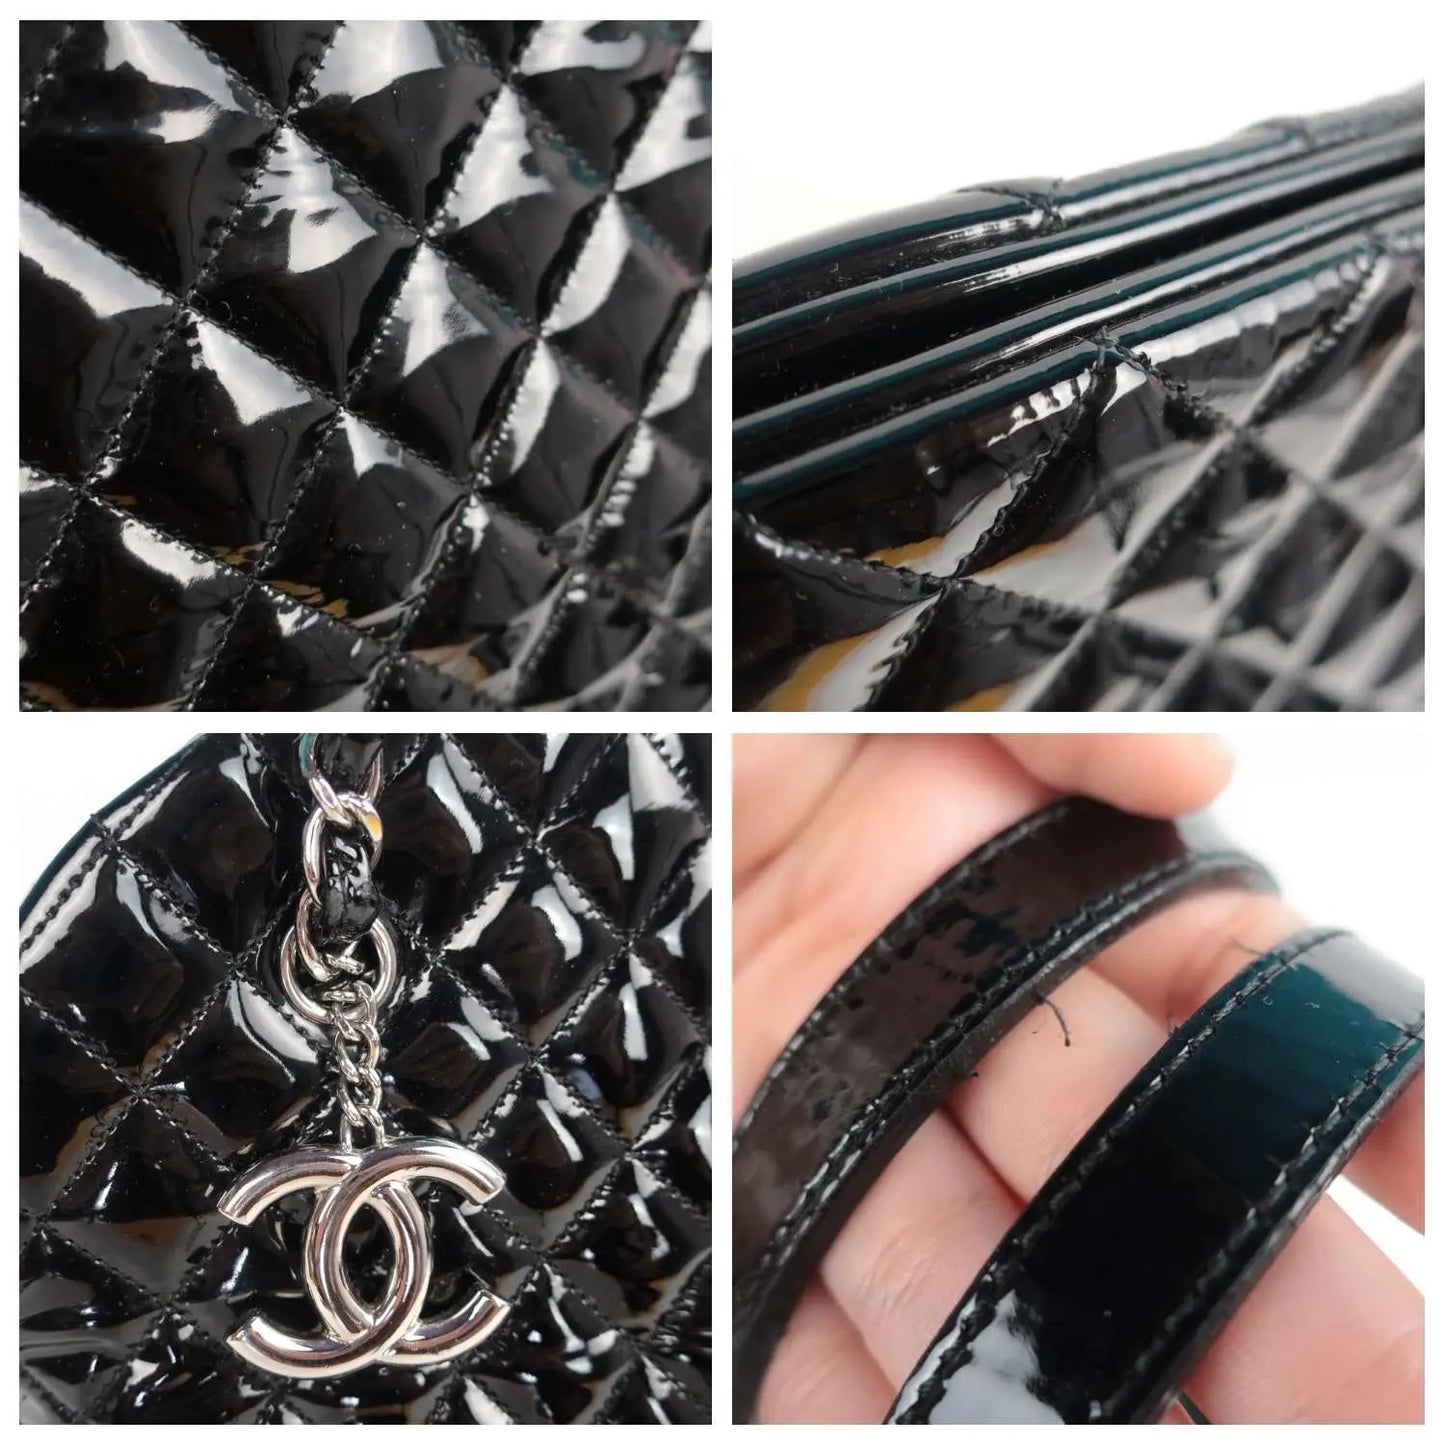 Chanel Large Mademoiselle Black Quilted Patent Leather Bag – Bagaholic